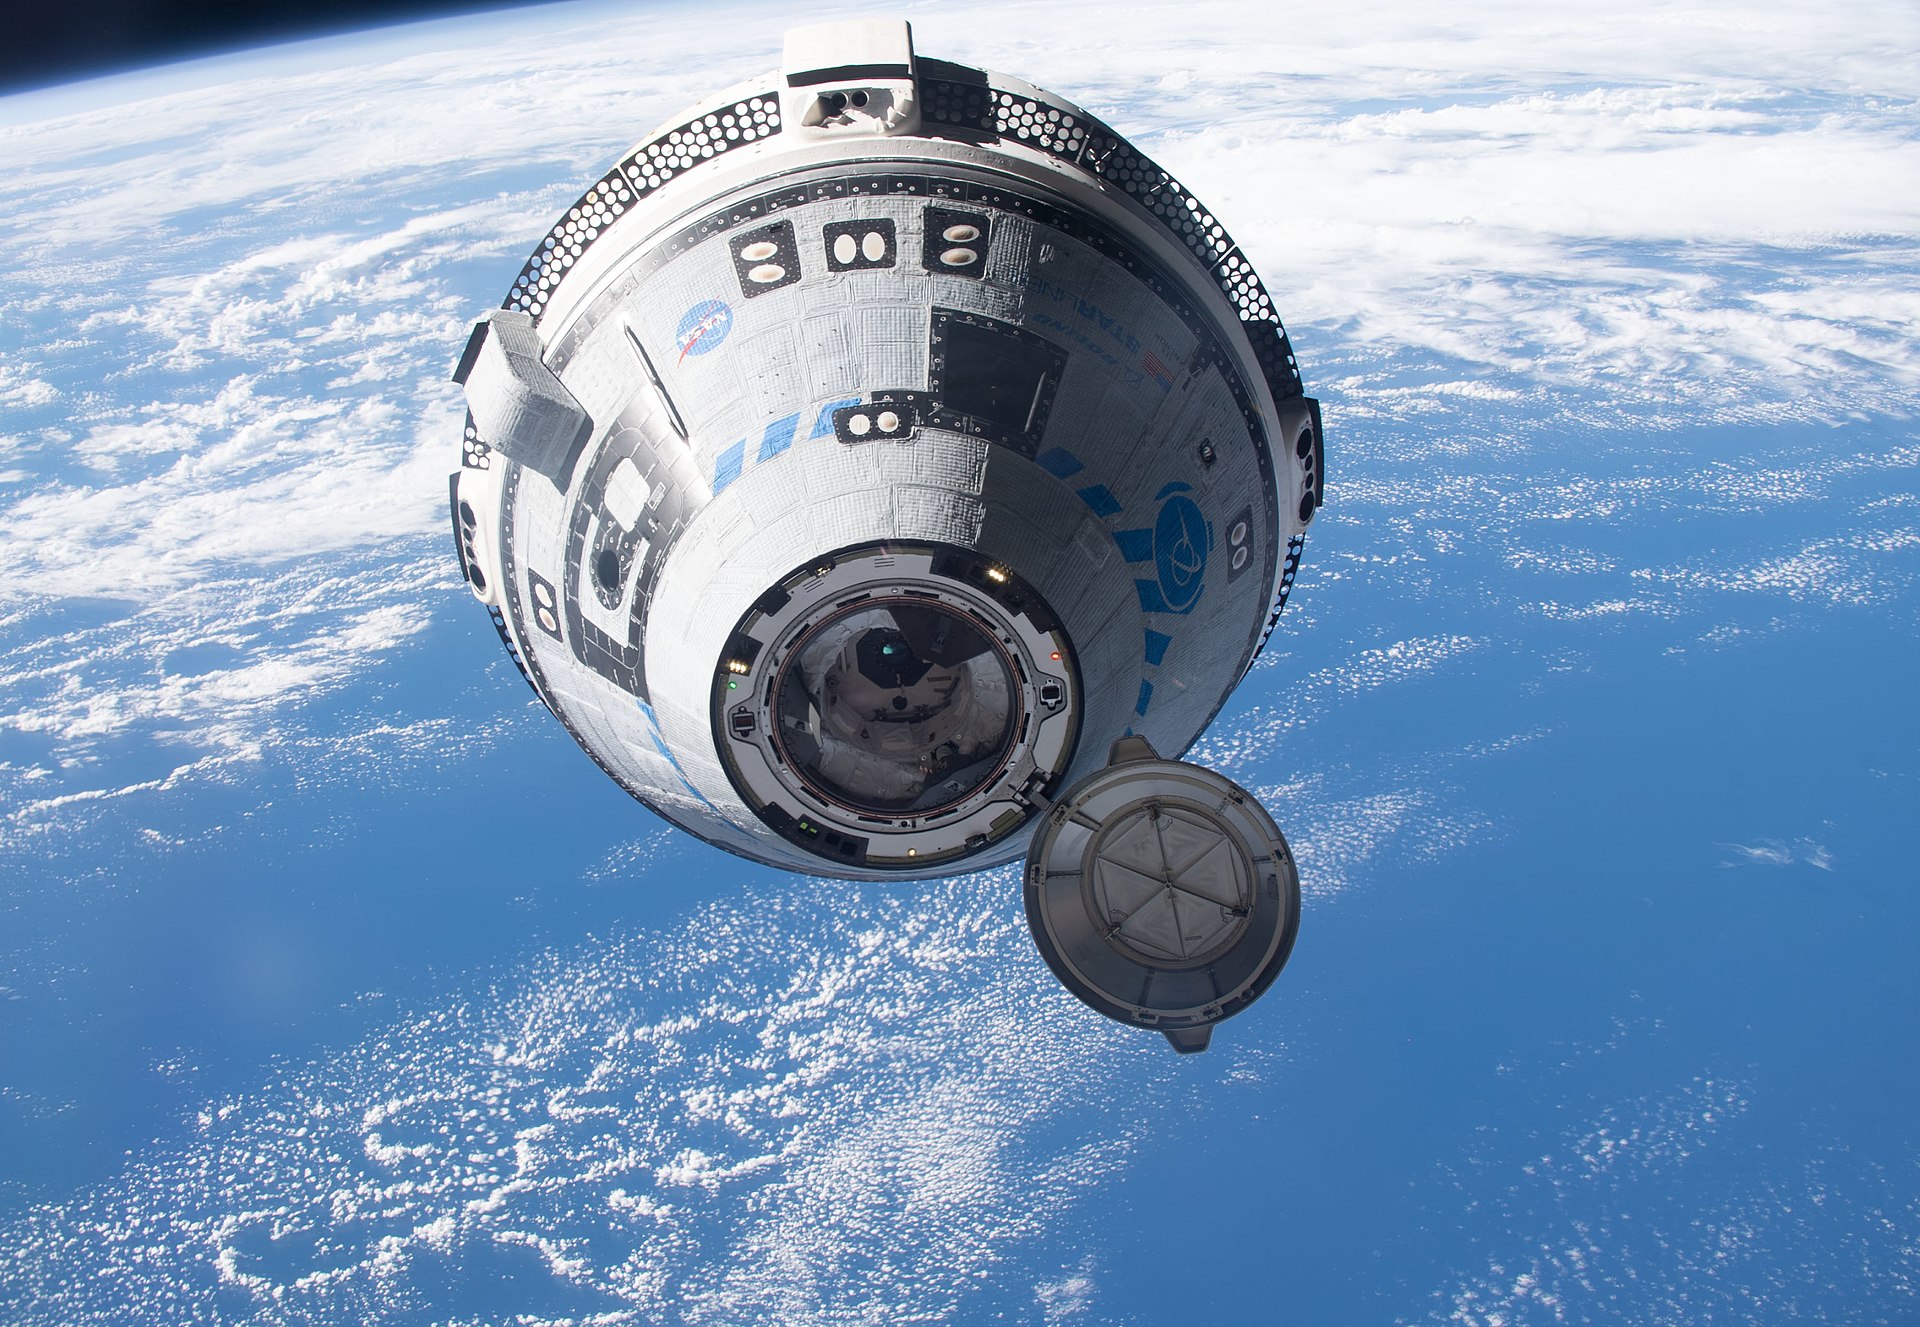 1920px-Boeing%27s_Starliner_crew_ship_approaches_the_space_station_%28iss067e066735%29_%28cropped%29.jpg